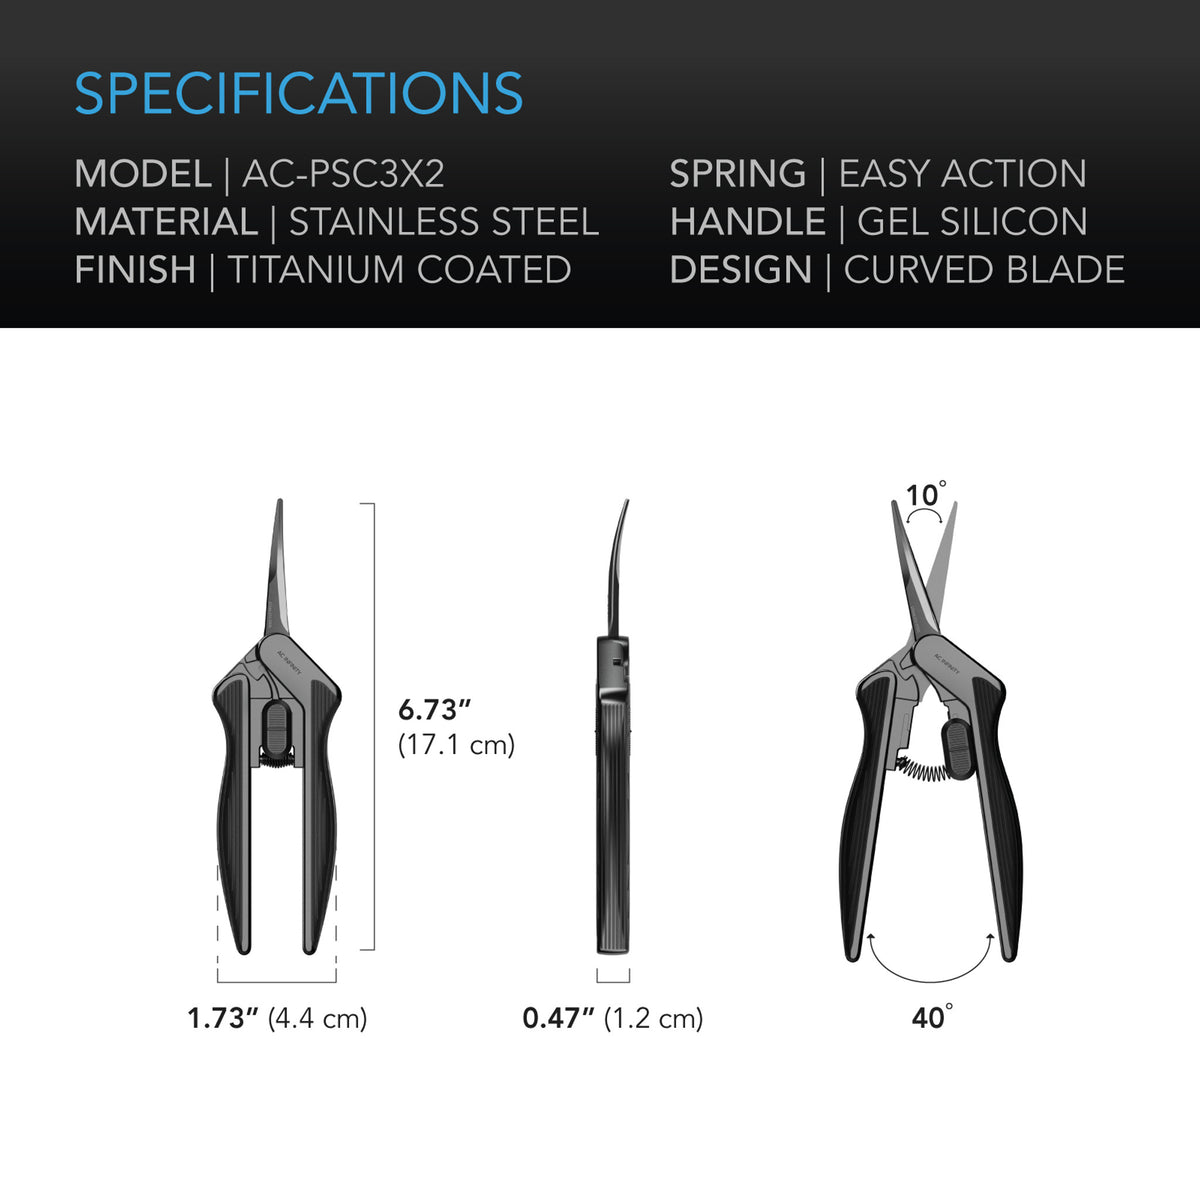 Curved Pruning shear specifications